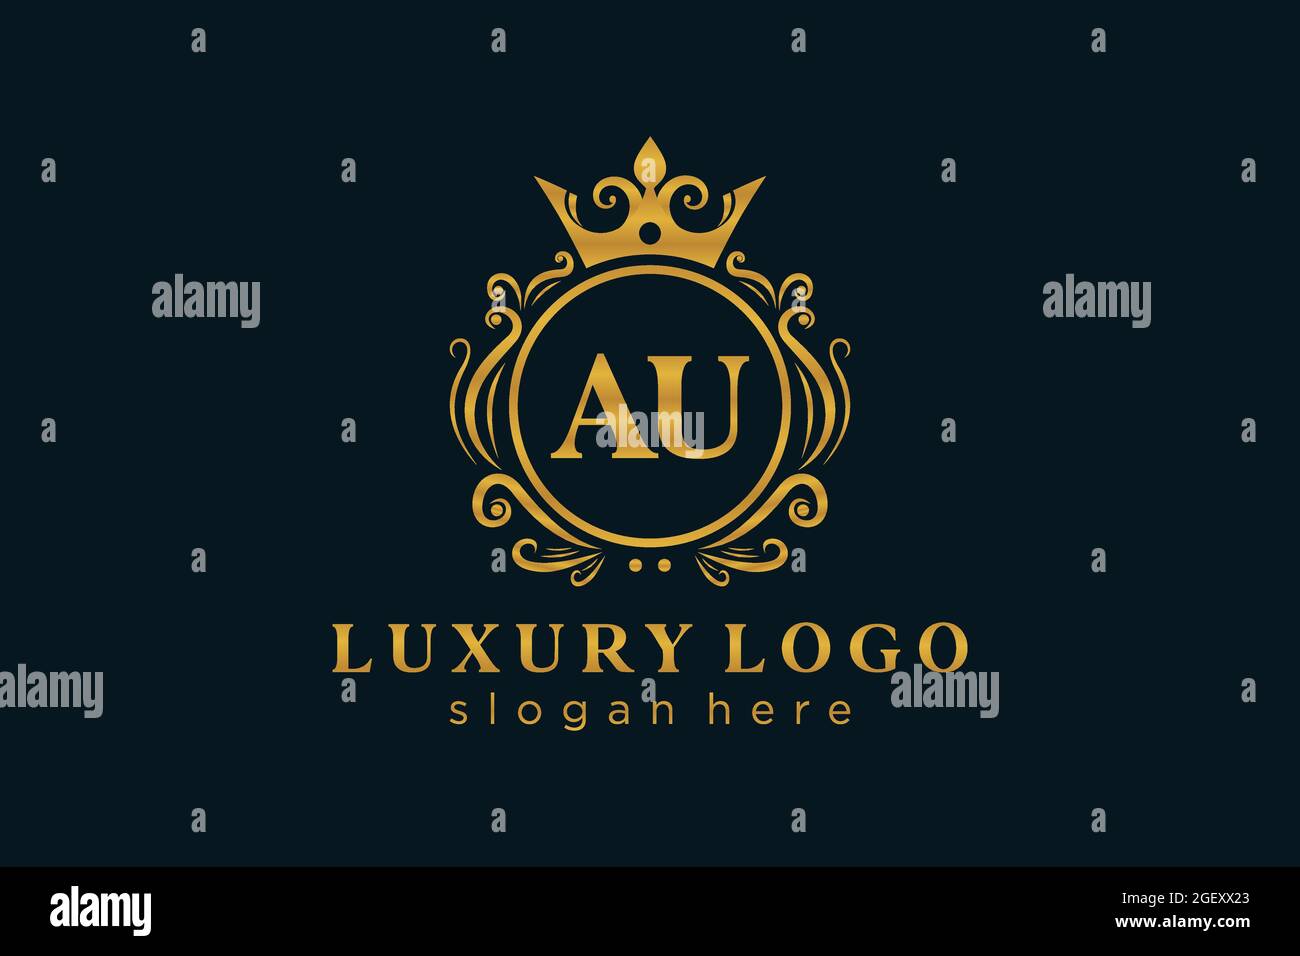 AU Letter Royal Luxury Logo template in vector art for Restaurant, Royalty, Boutique, Cafe, Hotel, Heraldic, Jewelry, Fashion and other vector illustr Stock Vector